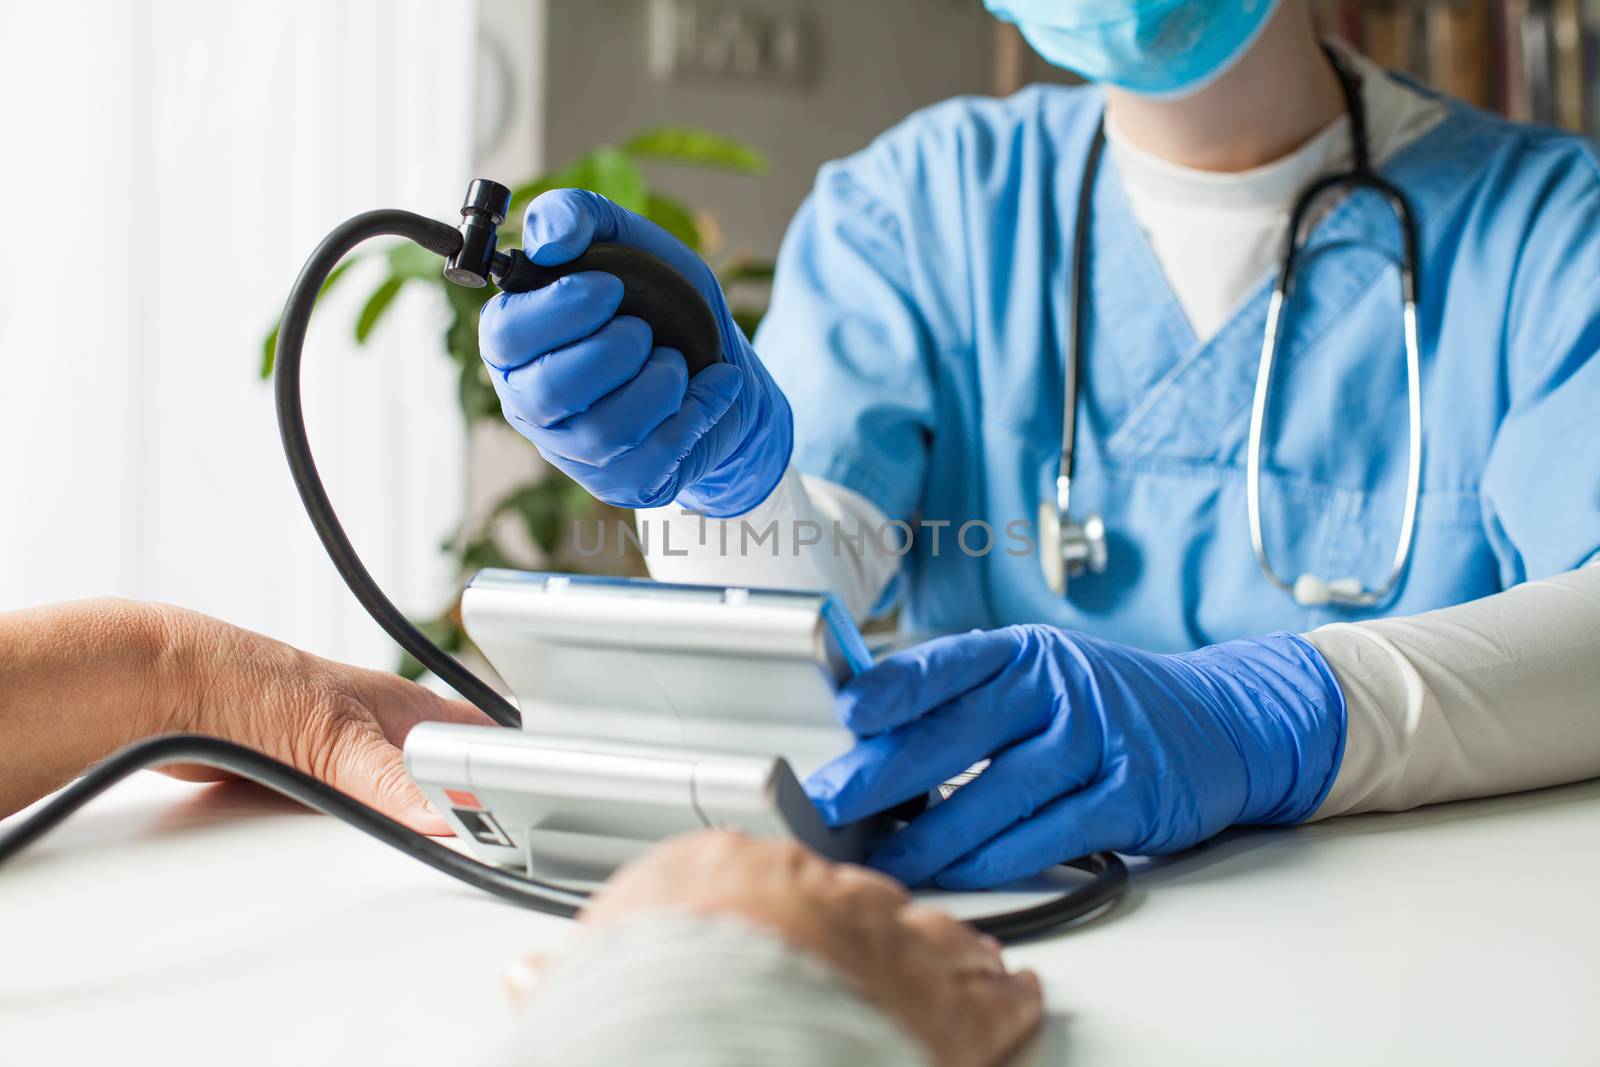 Doctor checking patient blood pressure using manual inflation bl by Plyushkin